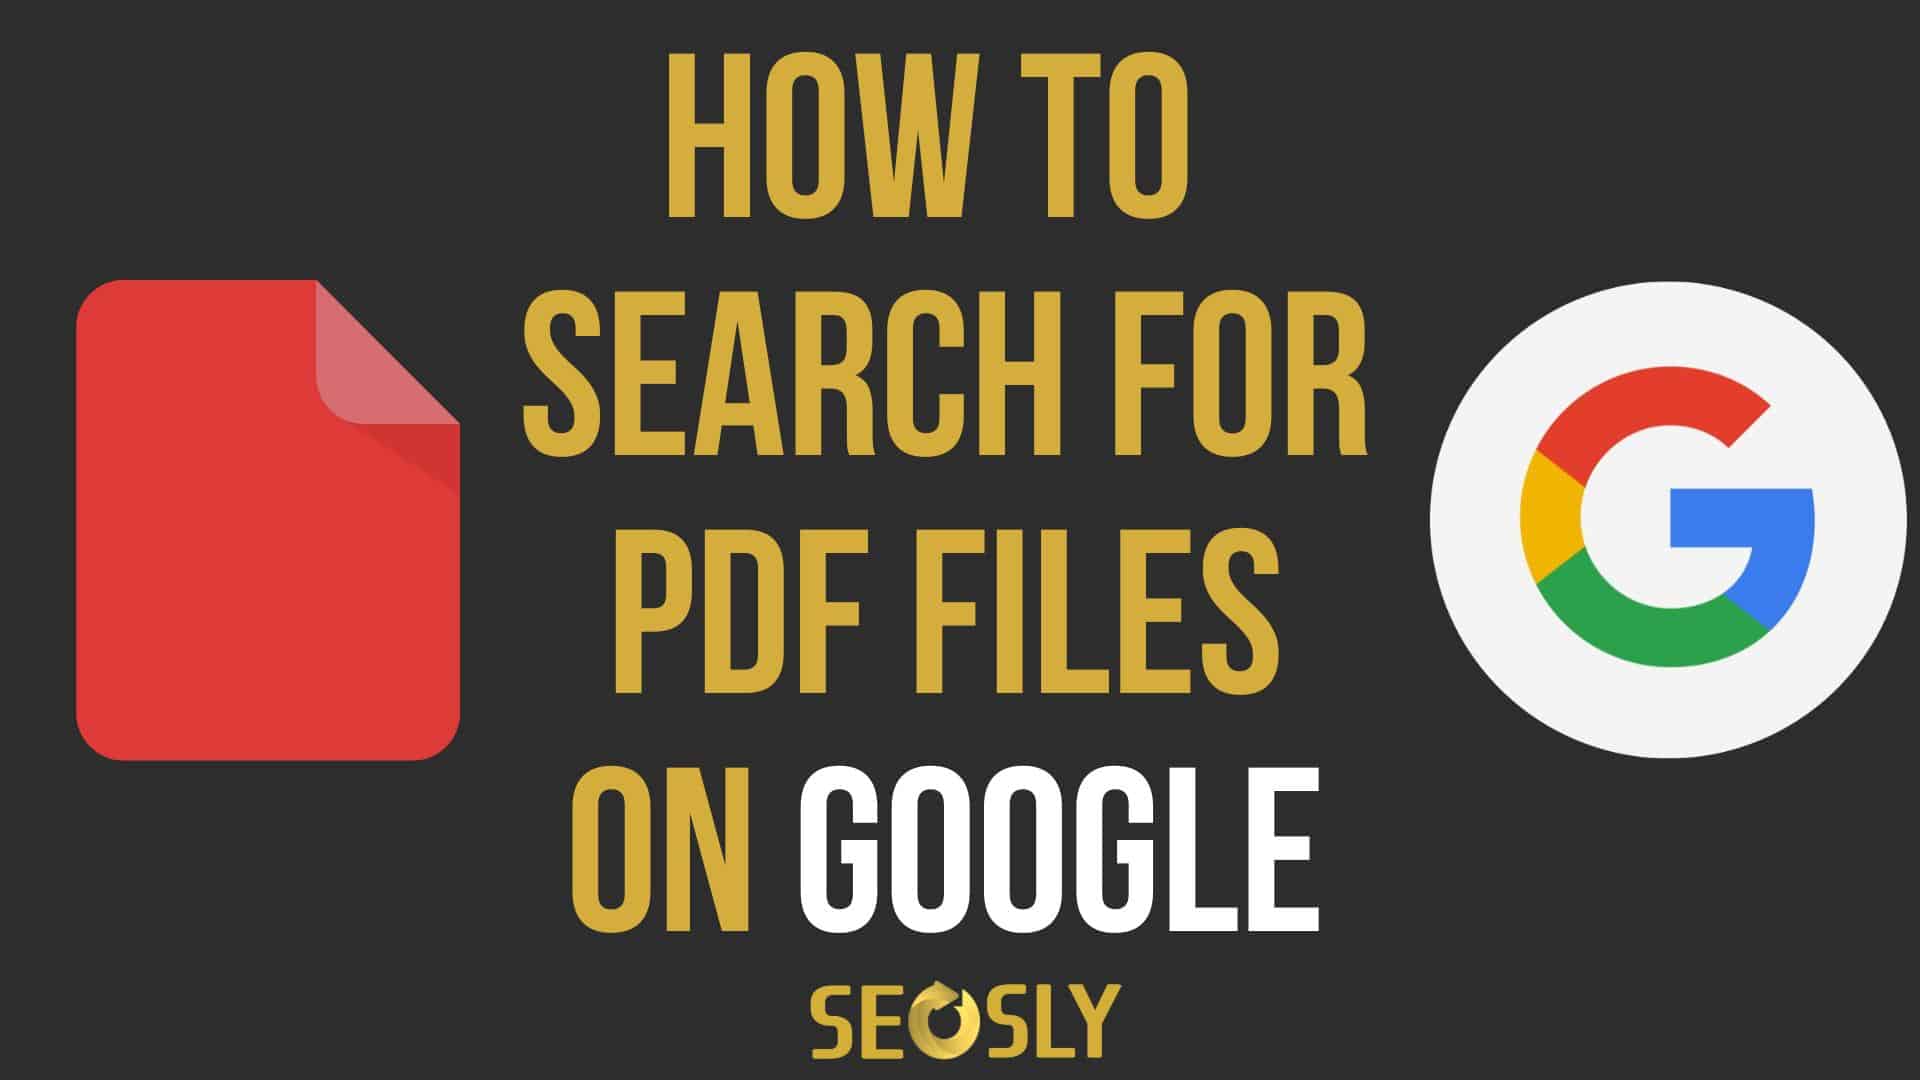 How To Search For PDFs On Google - SEOSLY